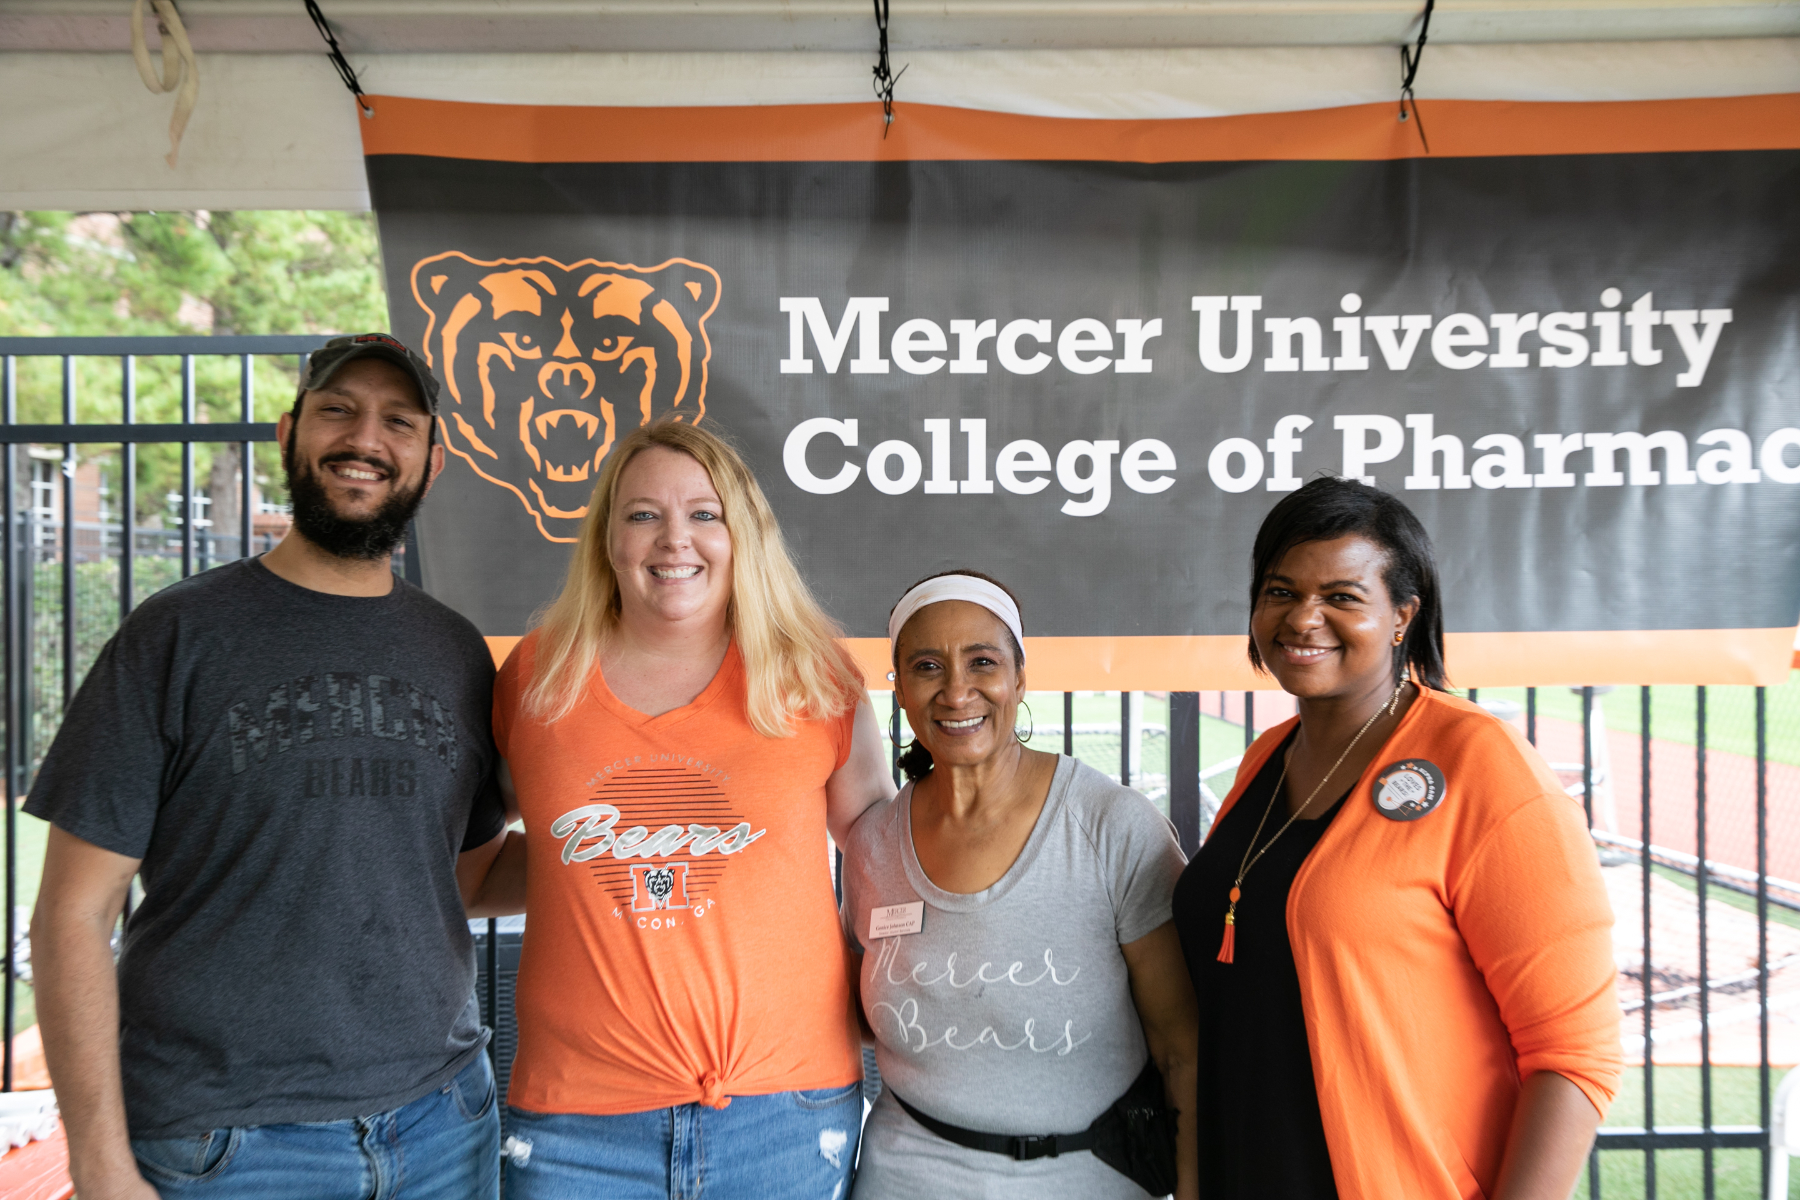 one man and three women stand in front of a mercer university college of pharmacy sign